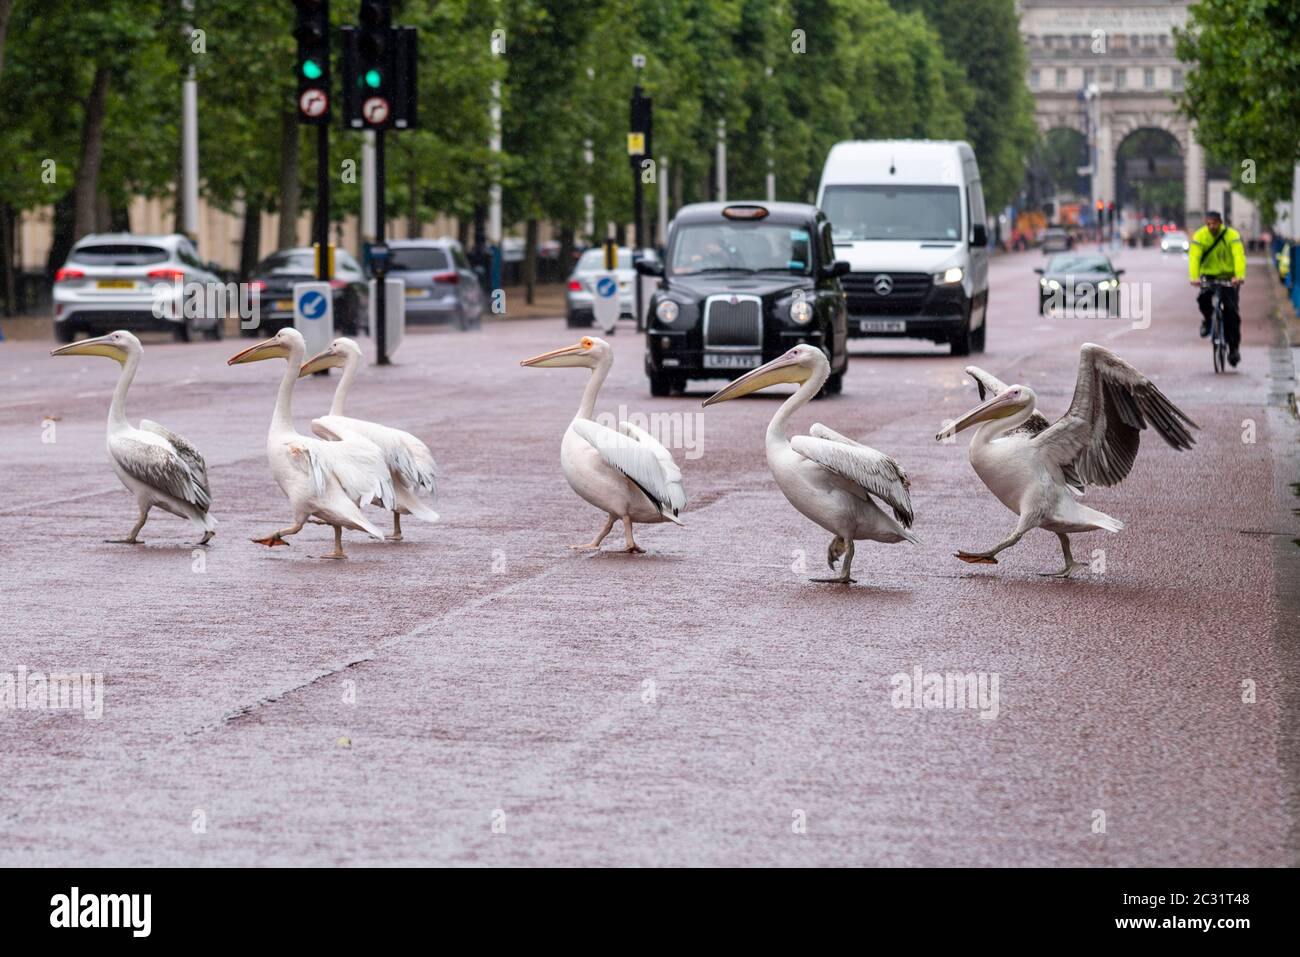 Pelicans crossing The Mall road in London, from St. James's Park, stopping traffic. Pelican crossing with attitude. Large birds walking in road Stock Photo